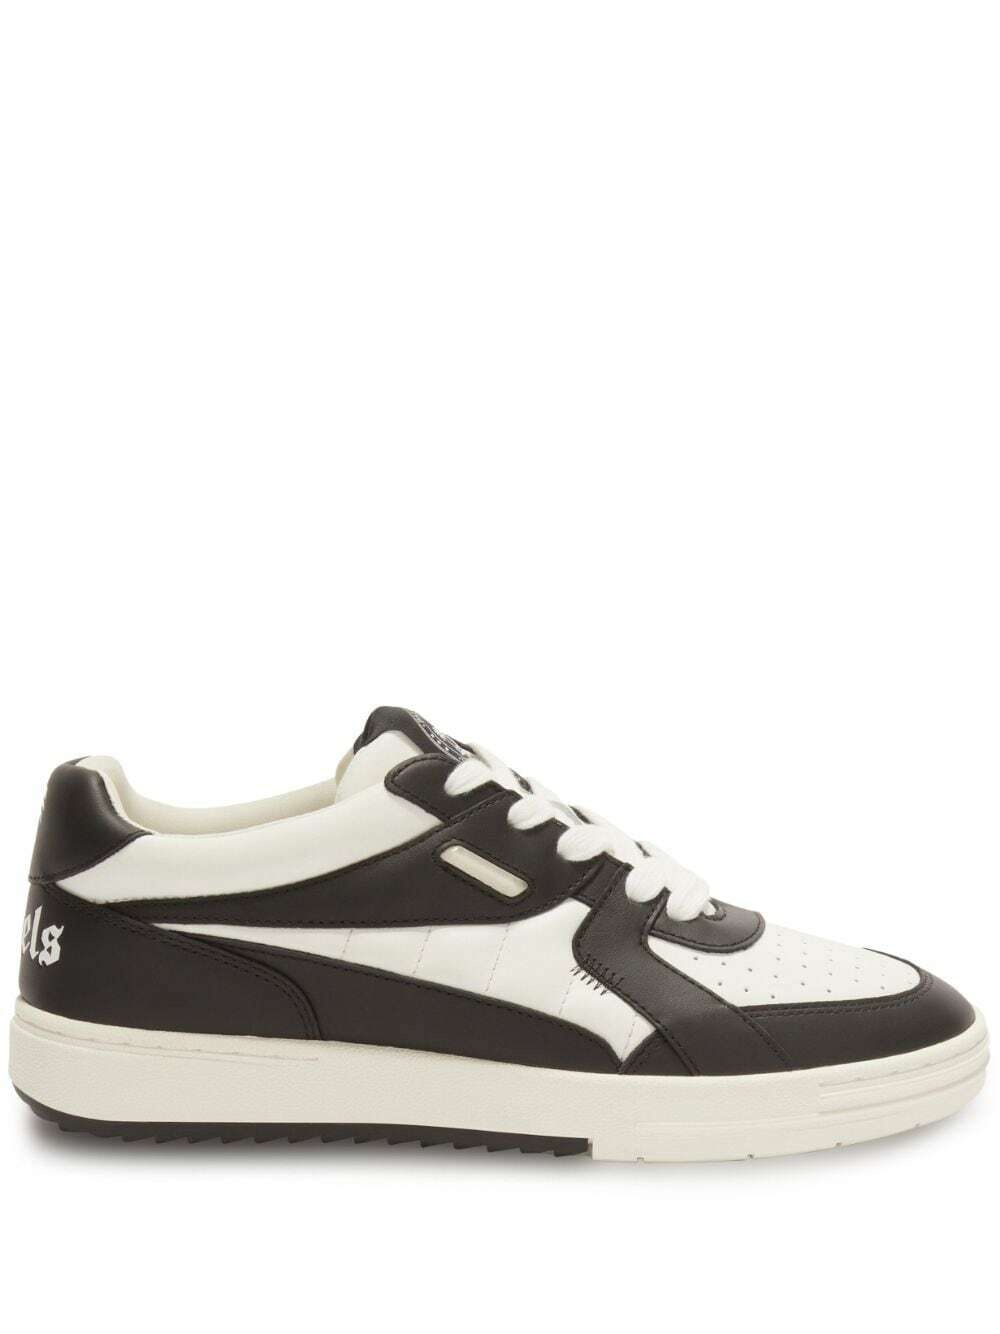 PALM ANGELS - Palm University Sneakers Palm Angels